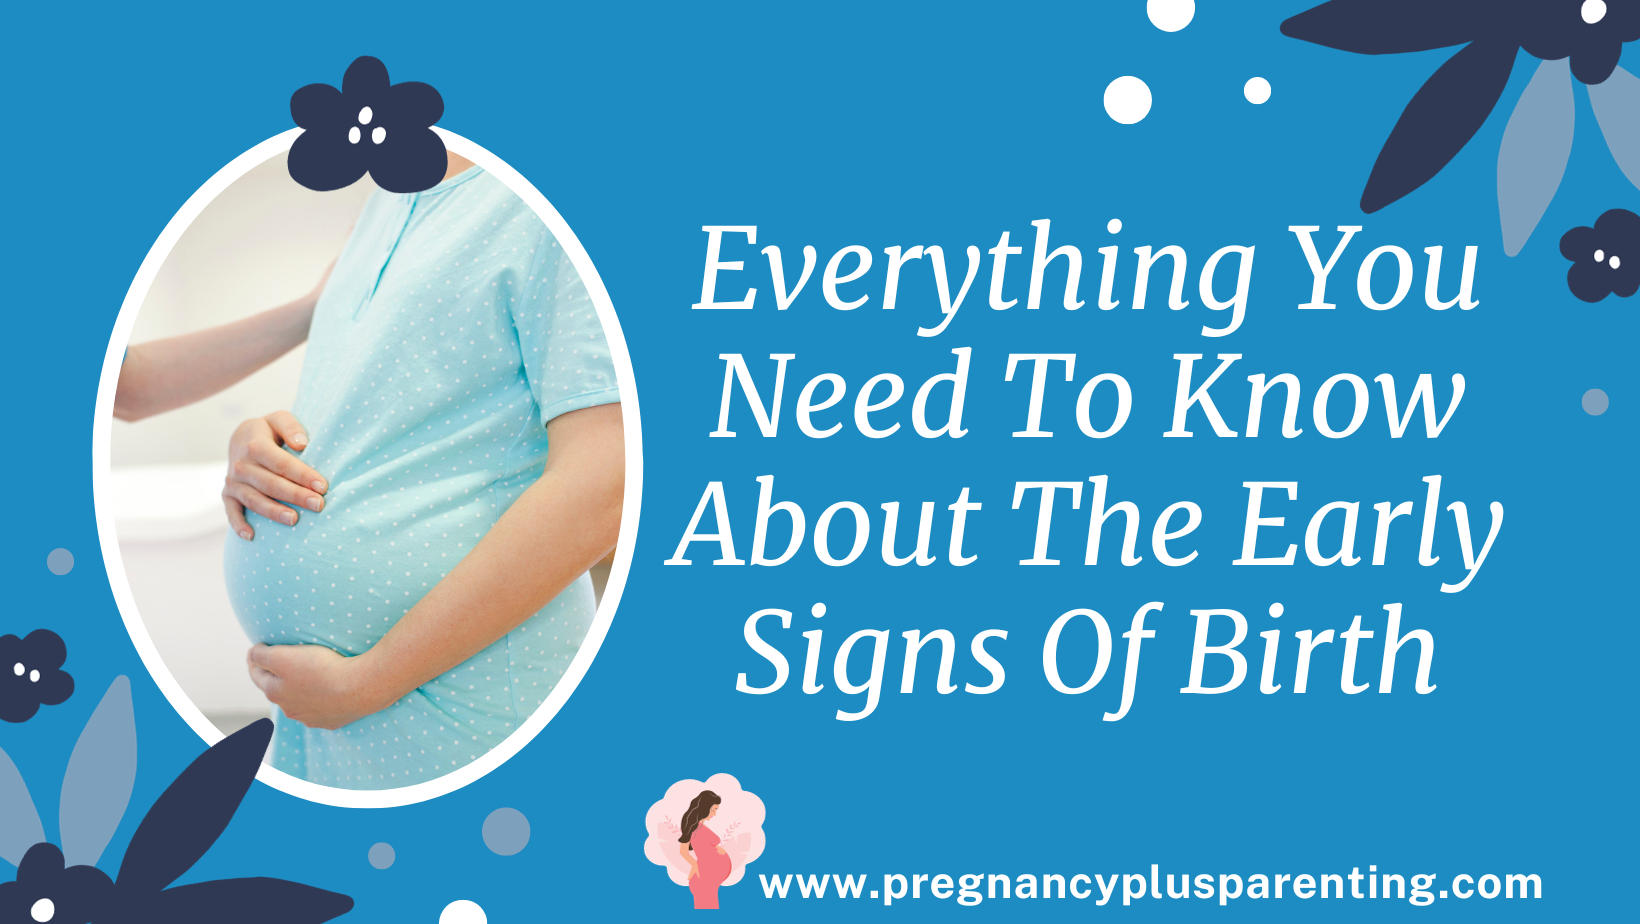 Everything You Need To Know About The Early Signs Of Birth